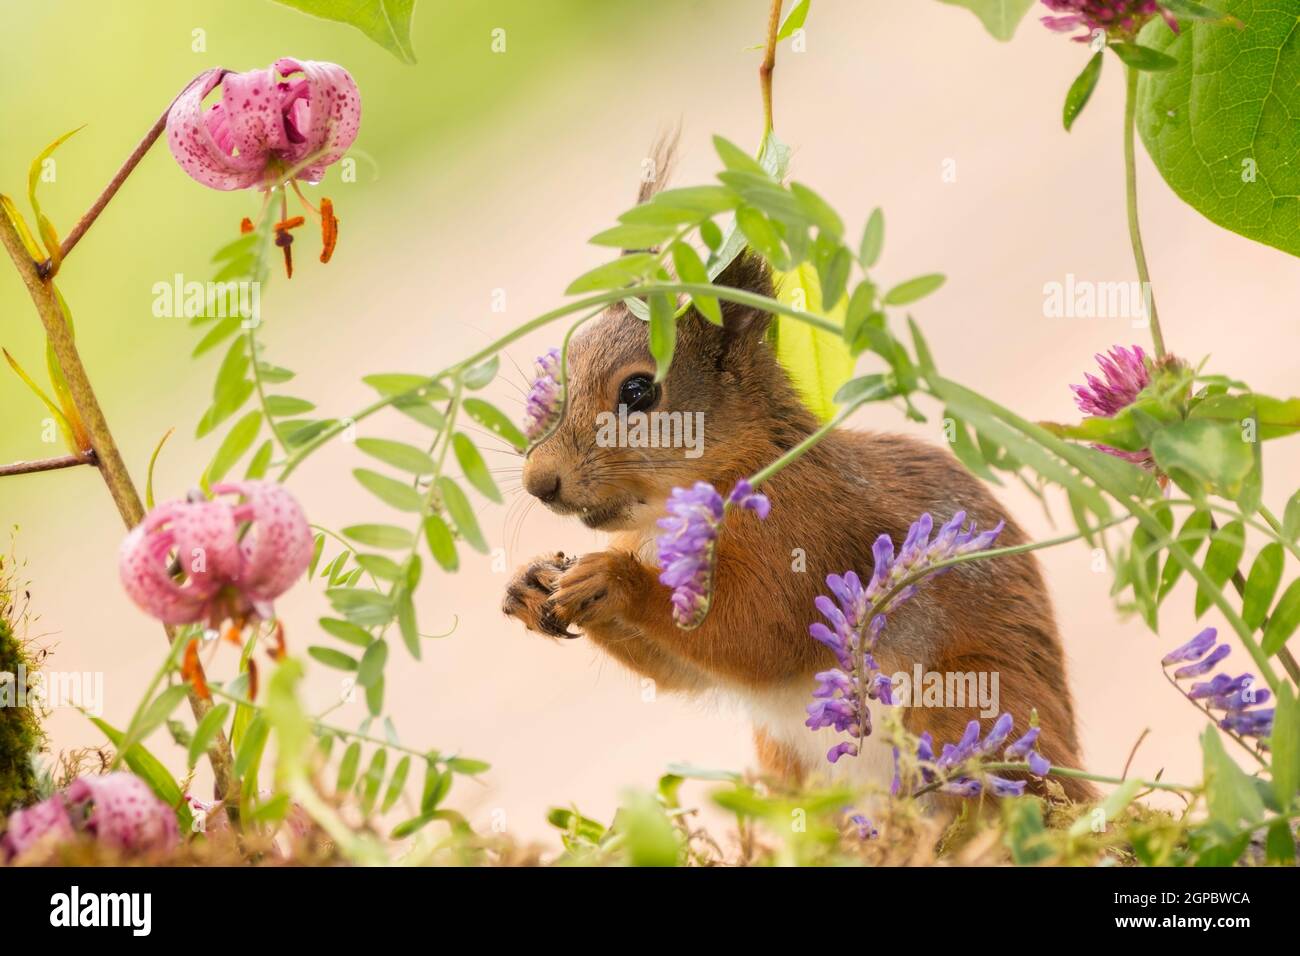 red squirrel standing and surrounded with lily and other flowers Stock Photo